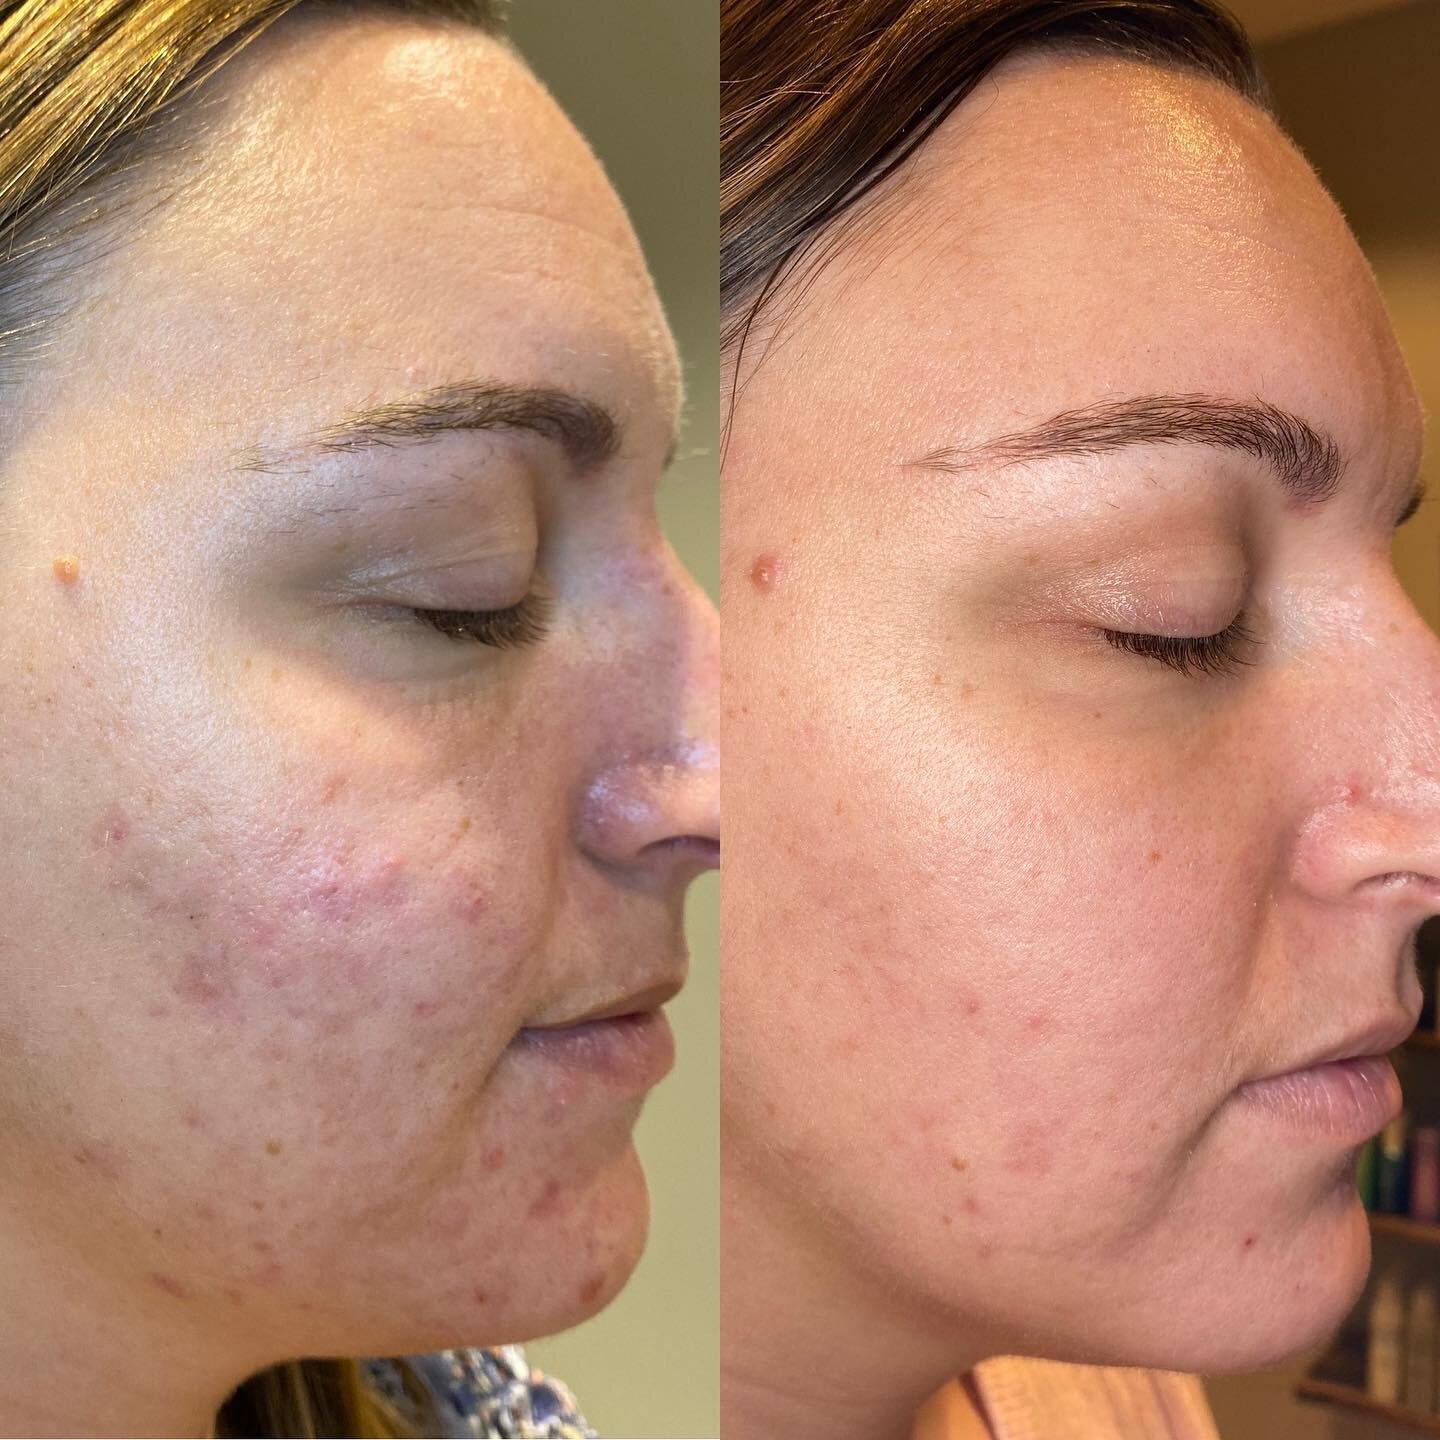 Nothing better than starting the week of with some amazing before and afters. We have been able to clear up 90% of her active acne and scarring with 4 rounds of the ProPeel + an at home skincare routine that includes mandelic acid and benzoyl peroxid